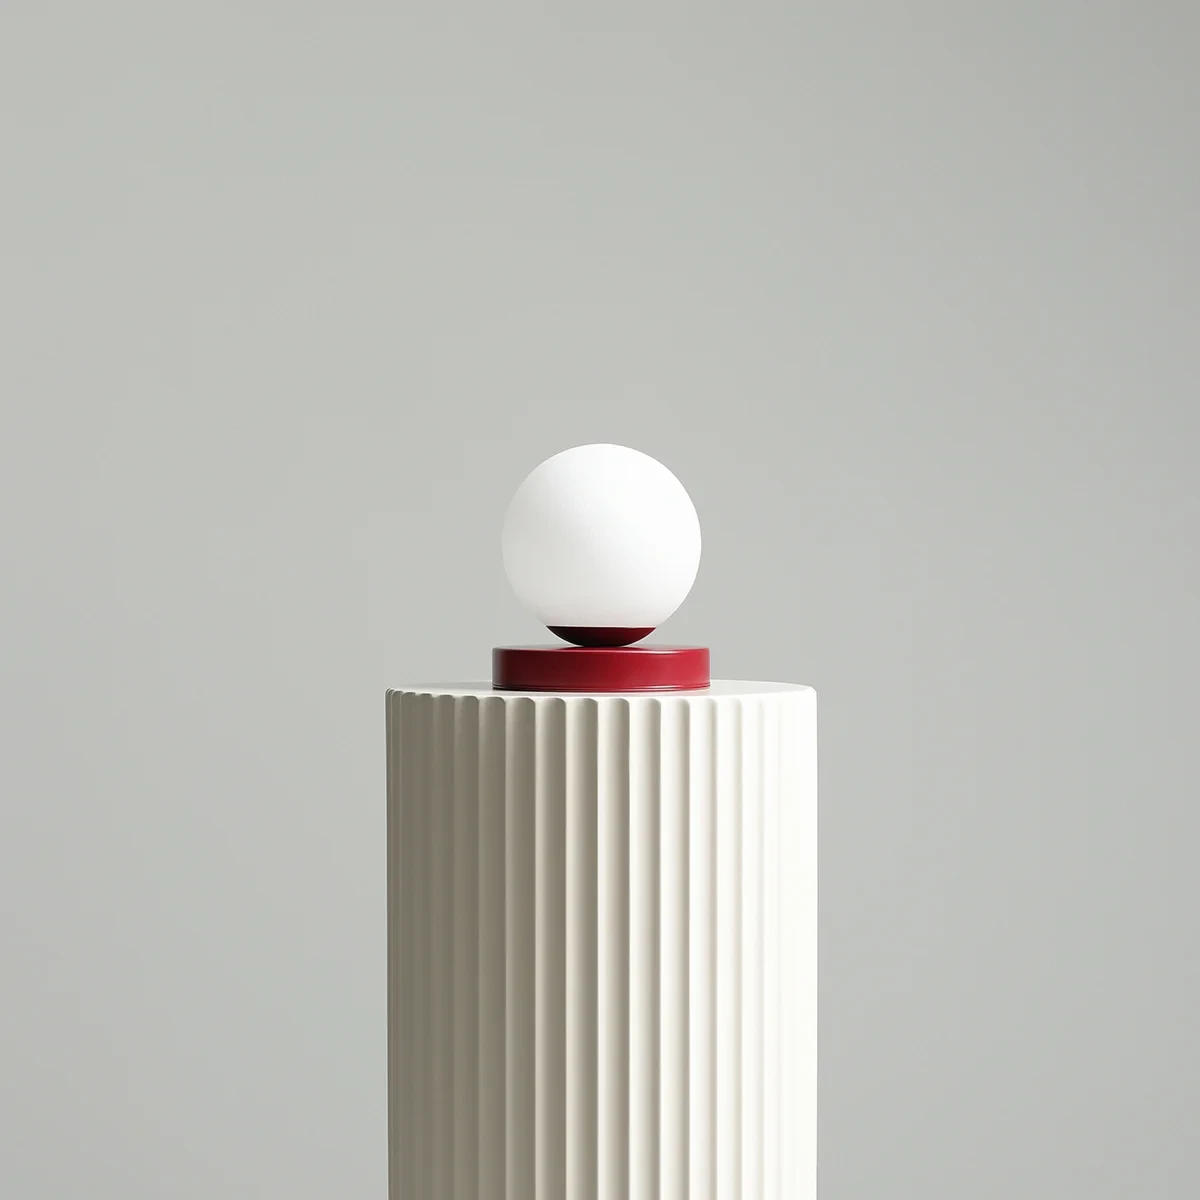 Table lamp Ball S red wine